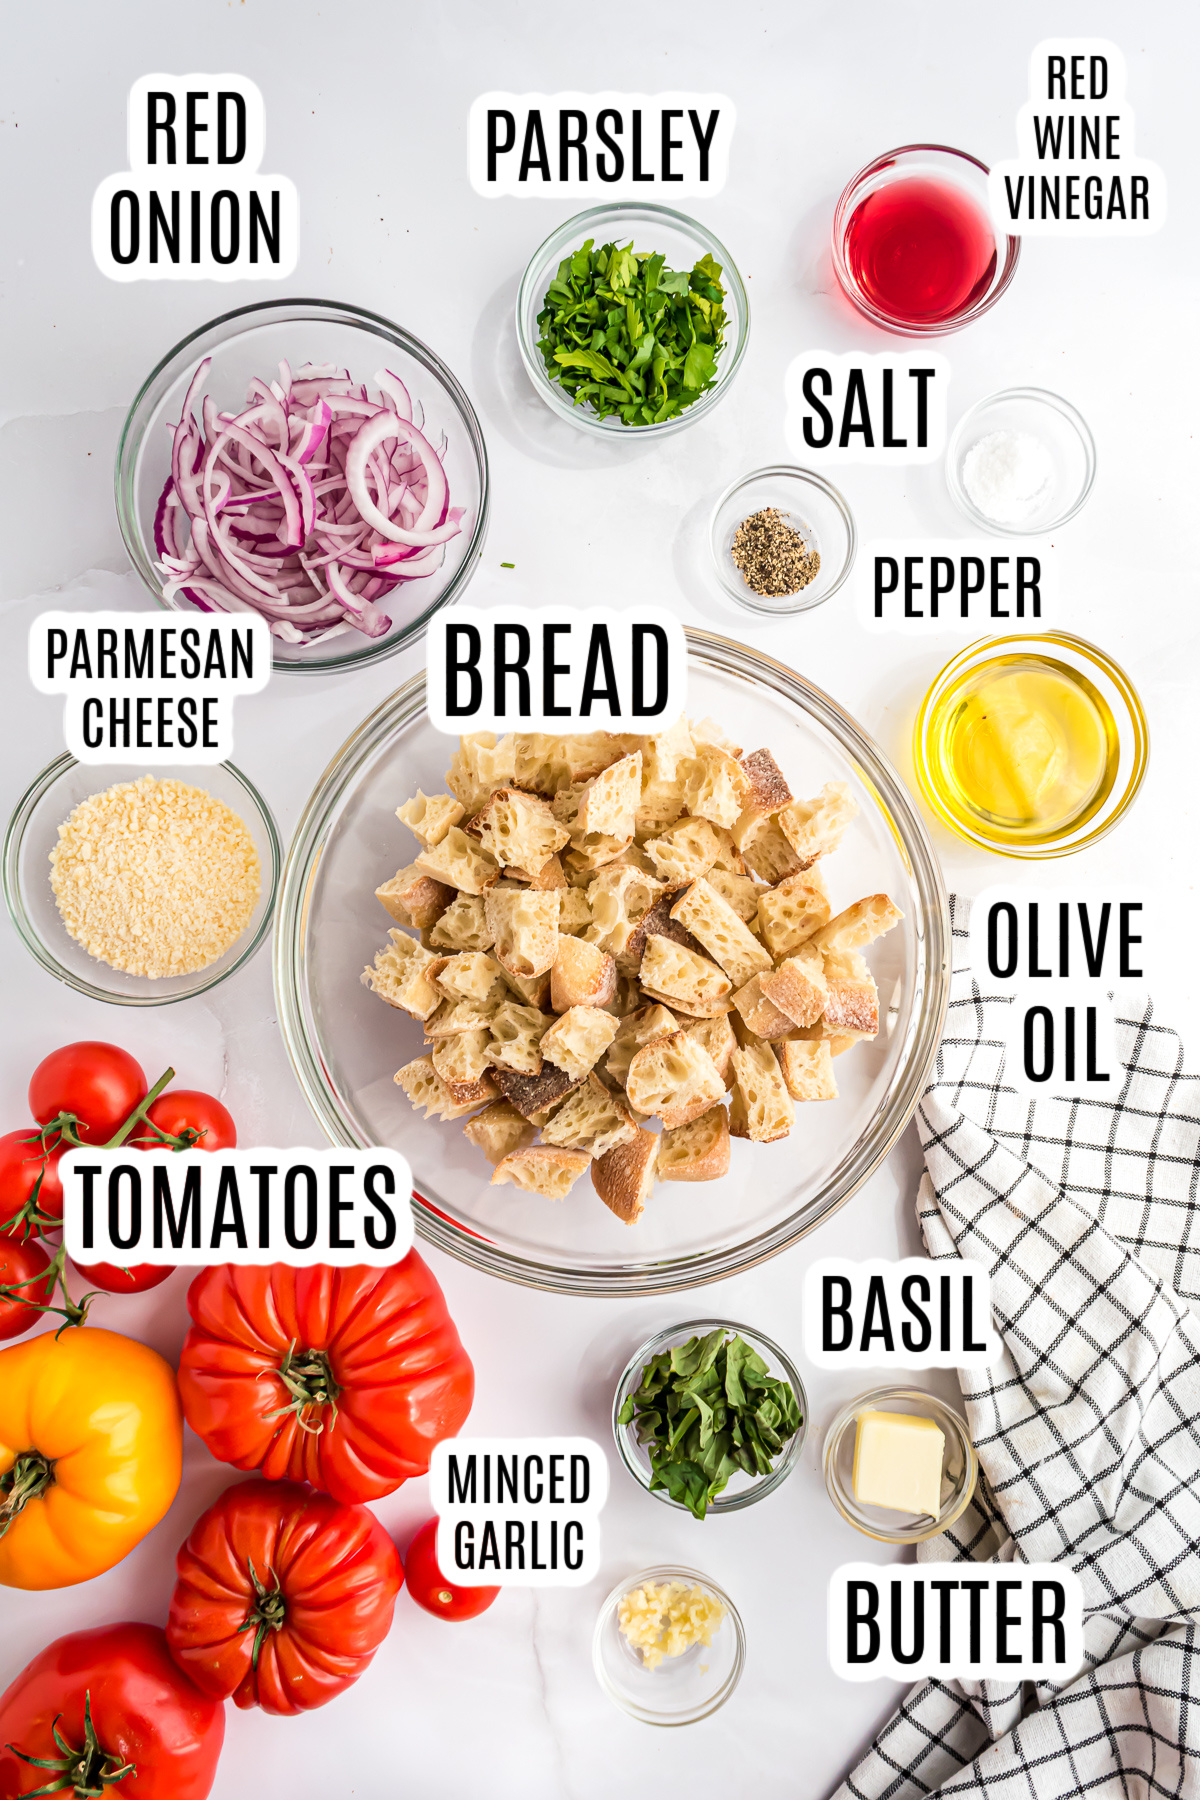 All the ingredients needed to make the Panzanella recipe including red onion, parsley, red wine vinegar, salt, pepper, olive oil, bread, grated parmesan cheese, tomatoes, minced garlic, basil, butter, and garlic.